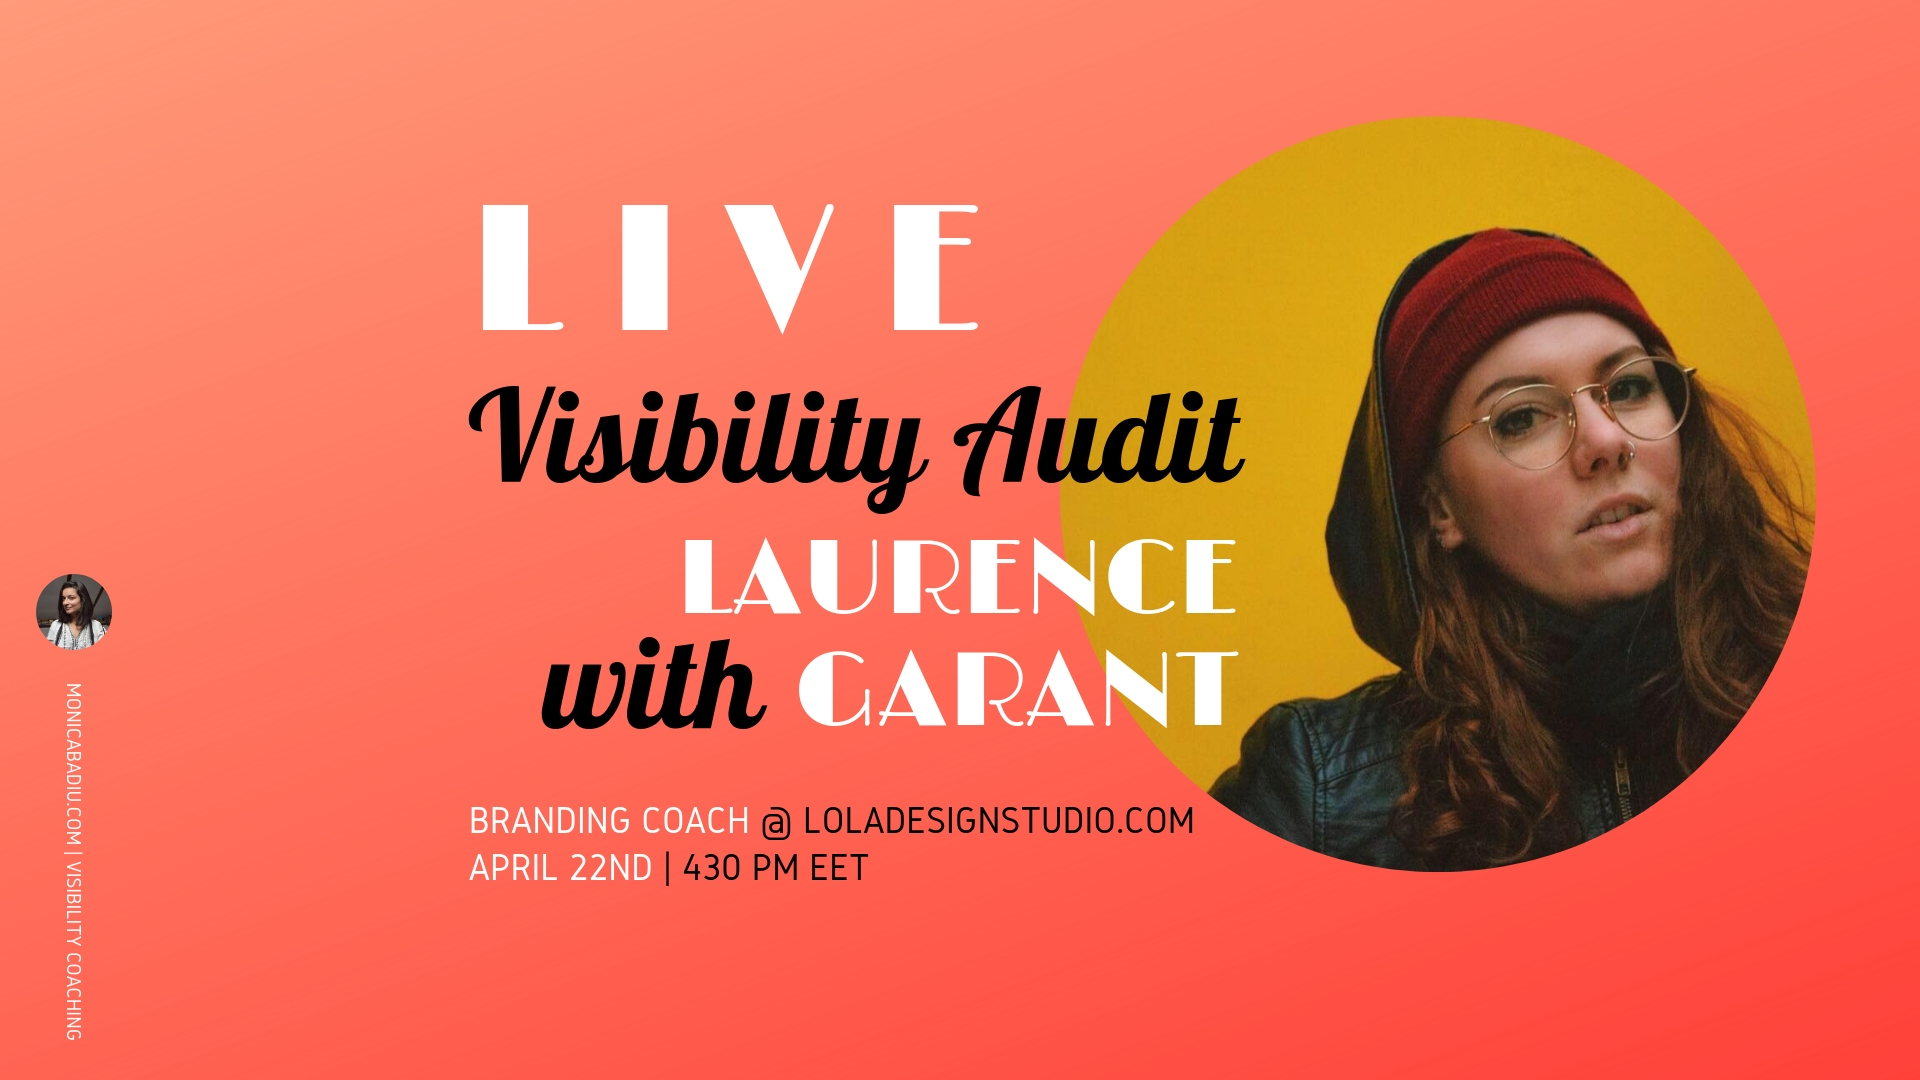 Watch Laurence Garant perform a live audit of my website and social channels.